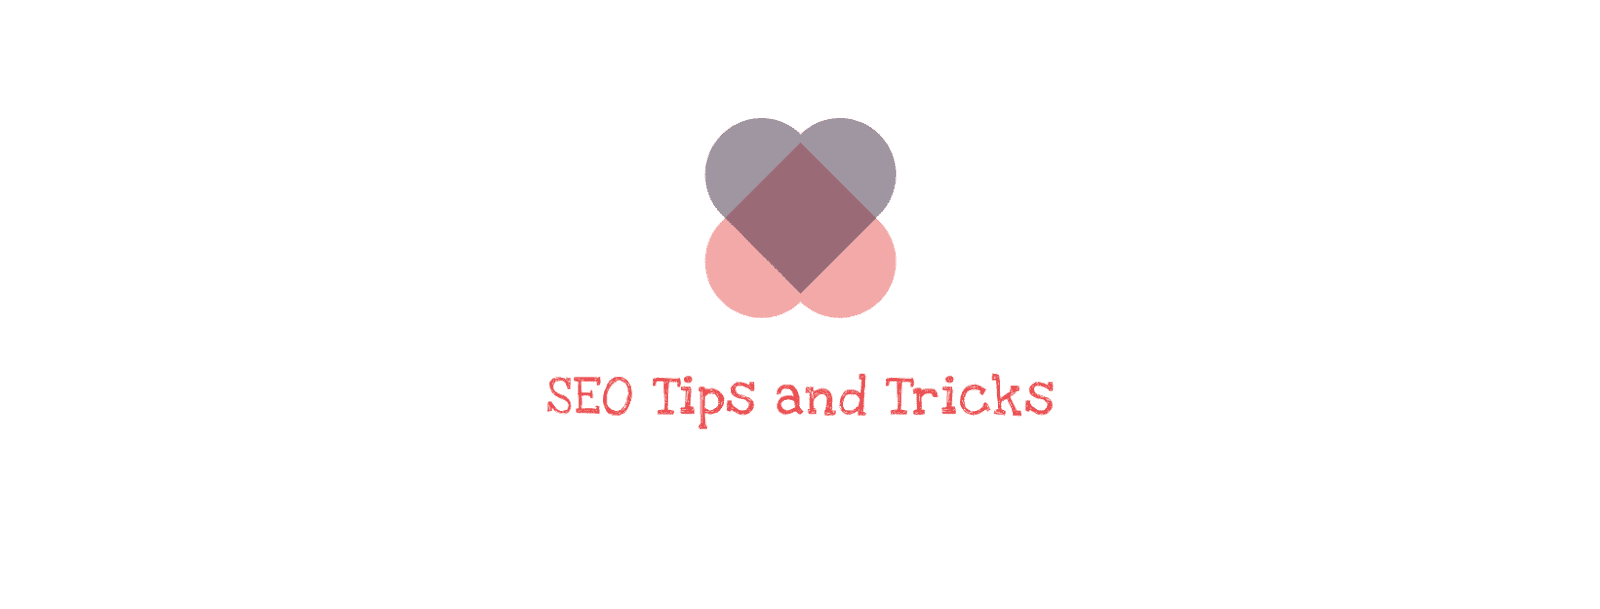 15 Awesome Things You Can Learn From SEO Tips And Tricks.